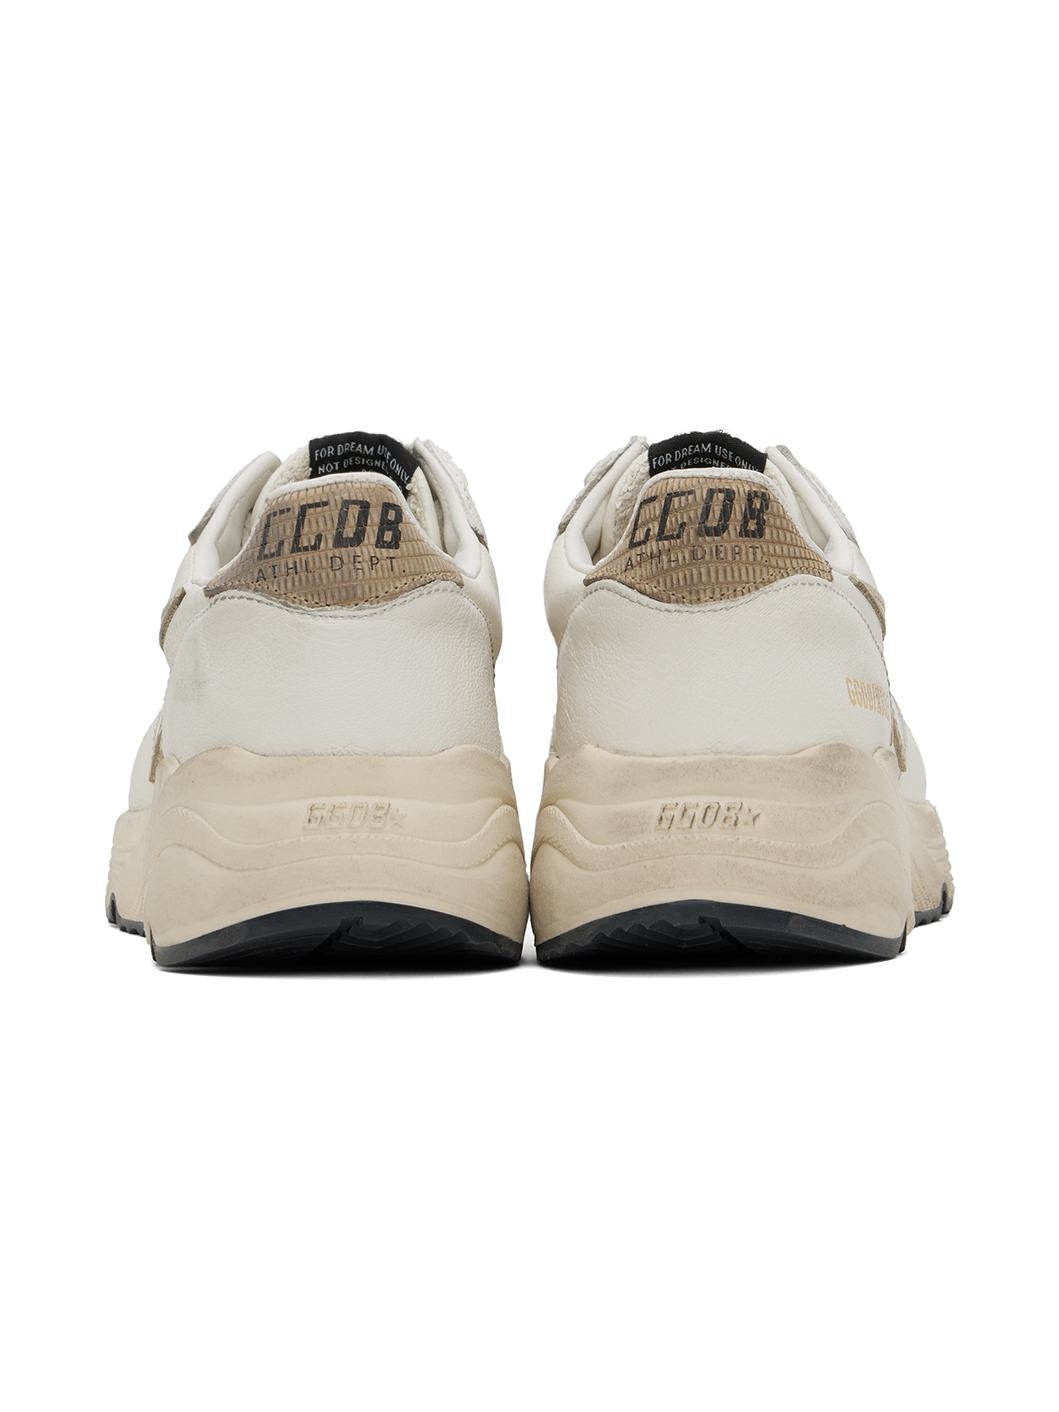 Off-White & Beige Running Sole Sneakers - 2